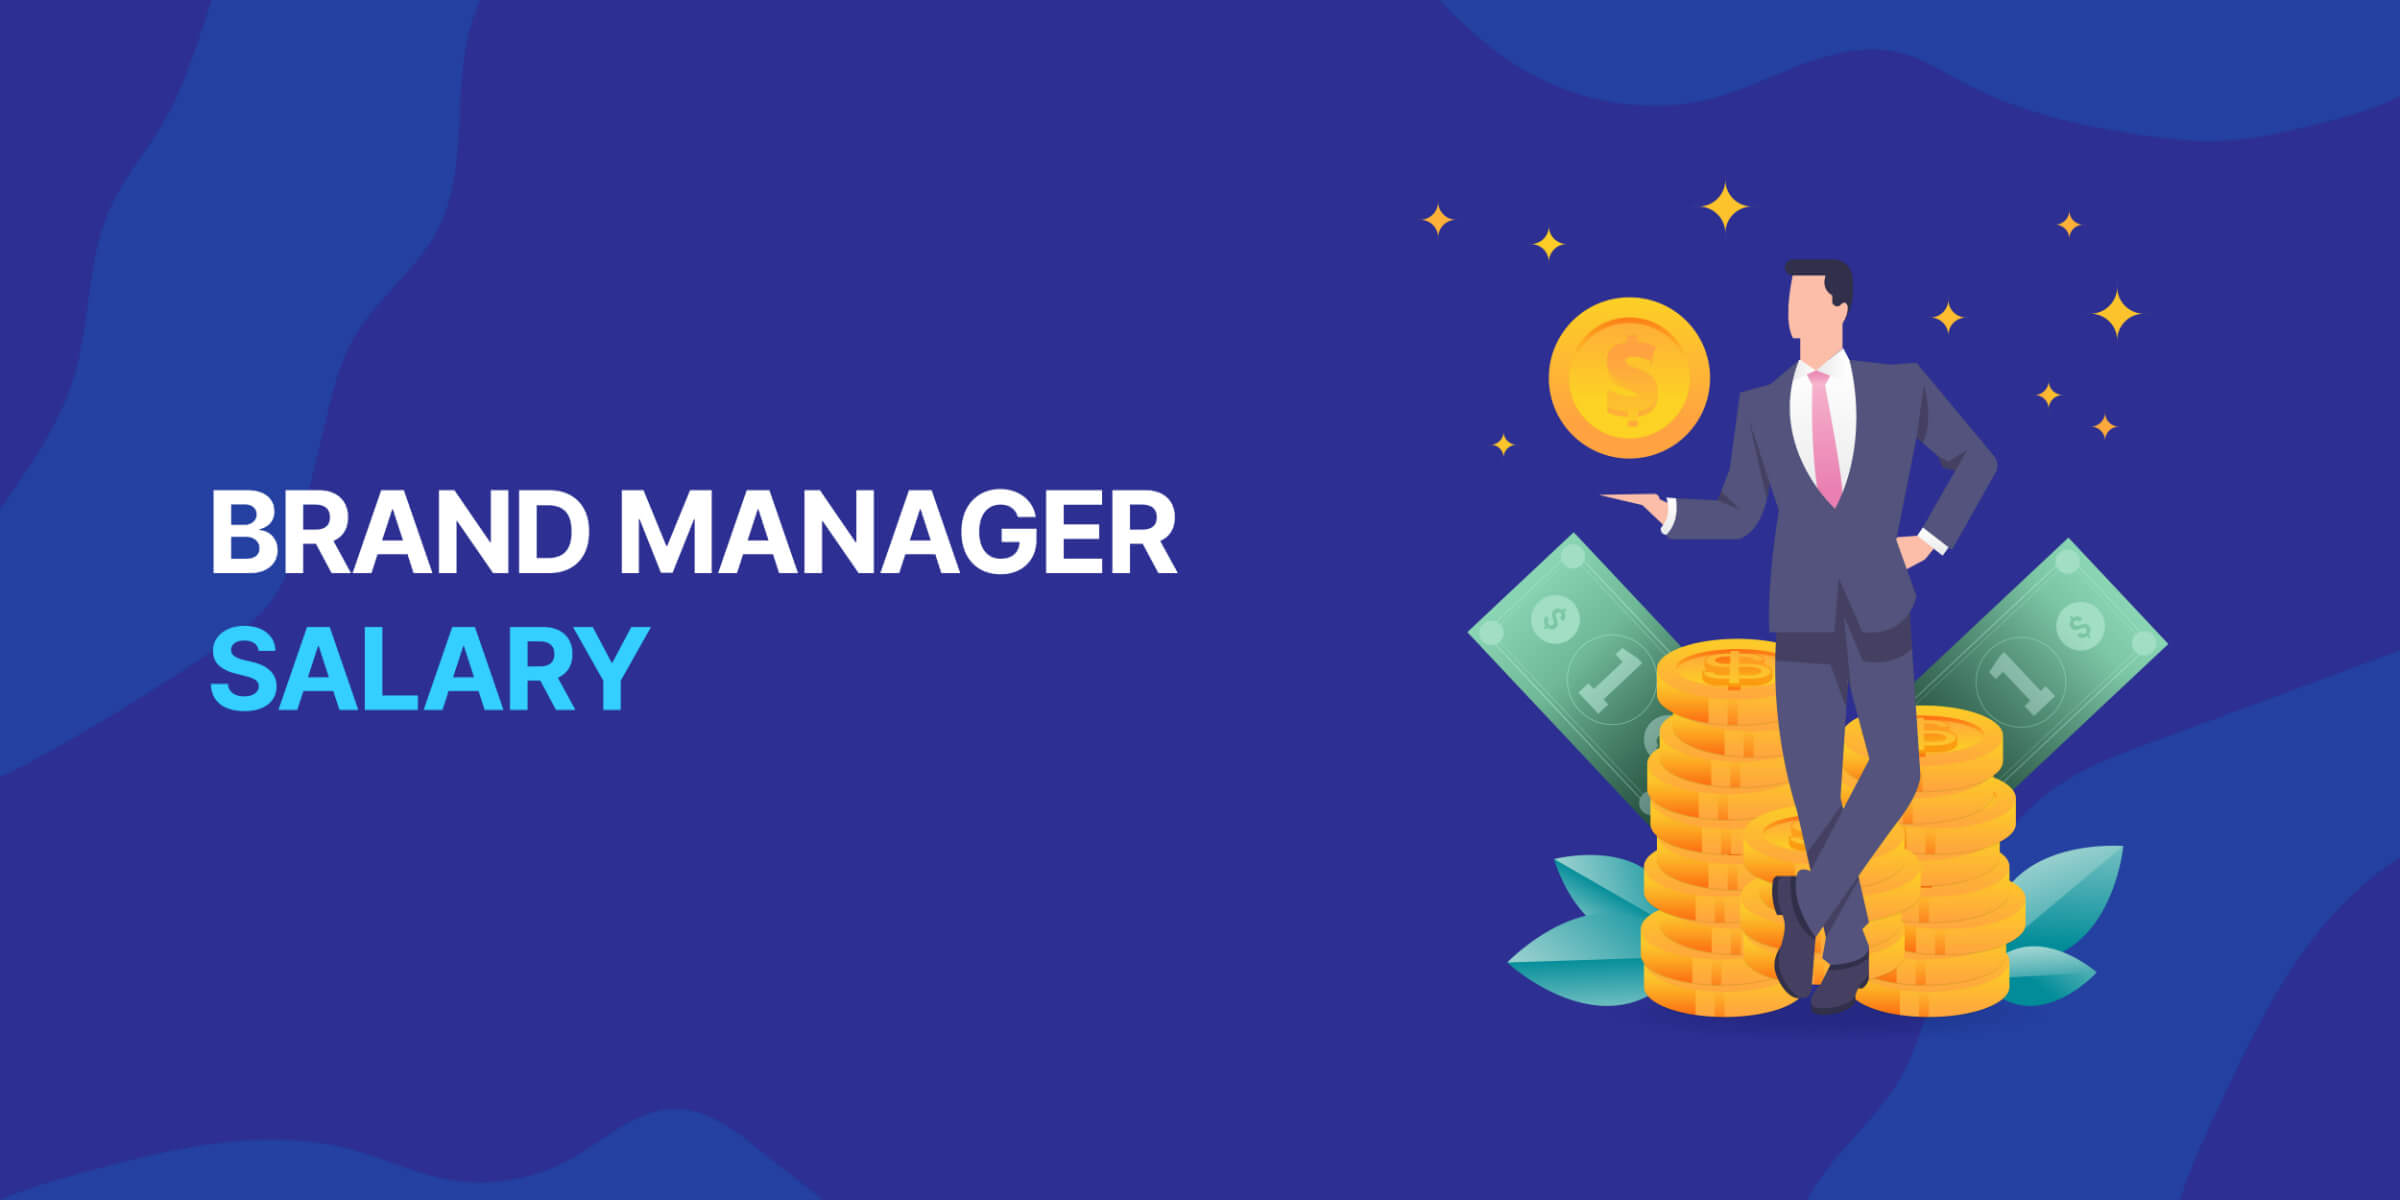 Brand Manager Salary